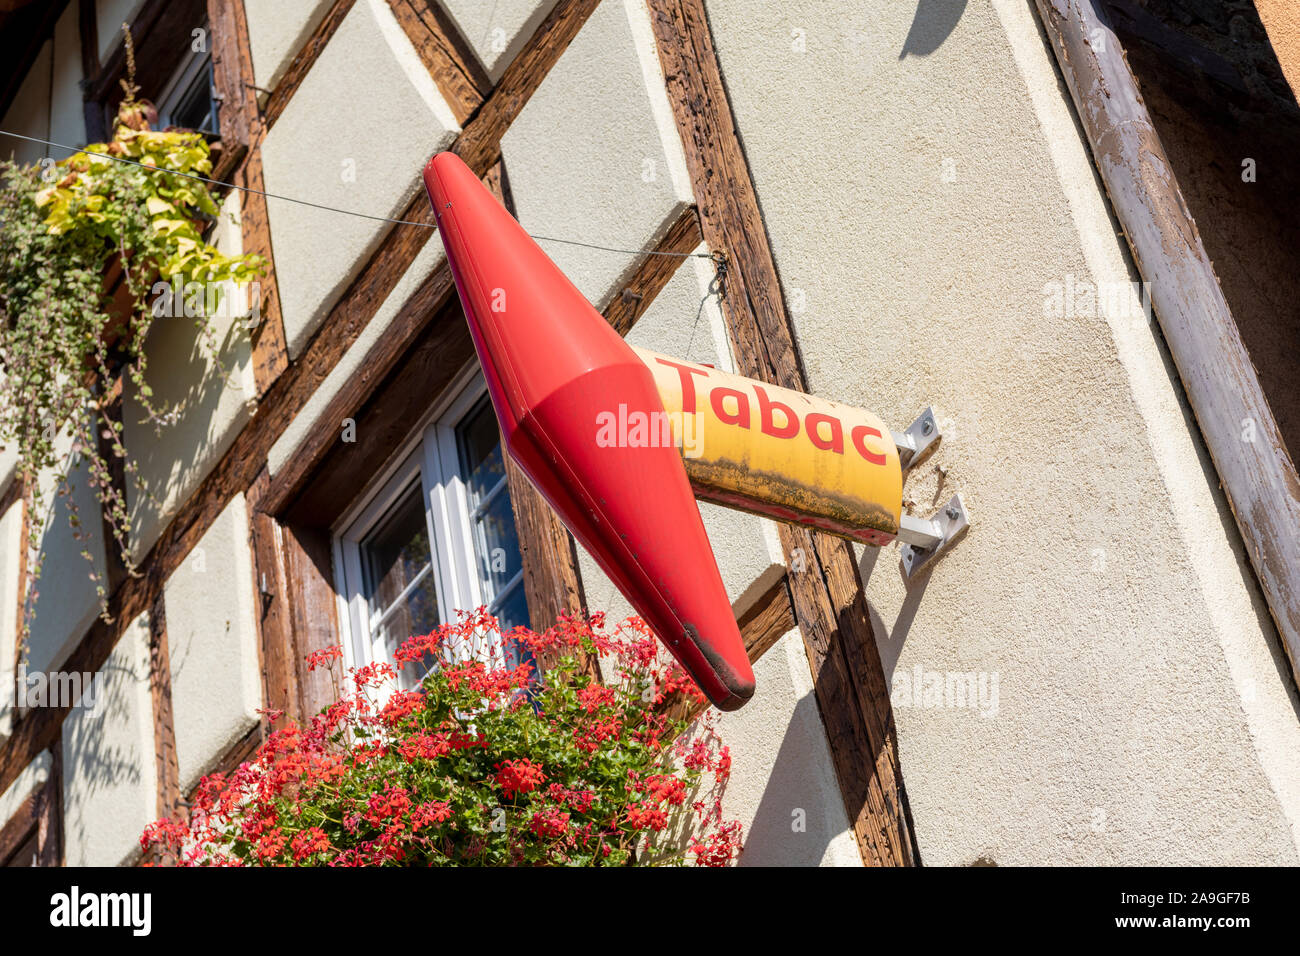 A french tabac or tabacconists shop sign on a wallin Eguisheim France Stock Photo